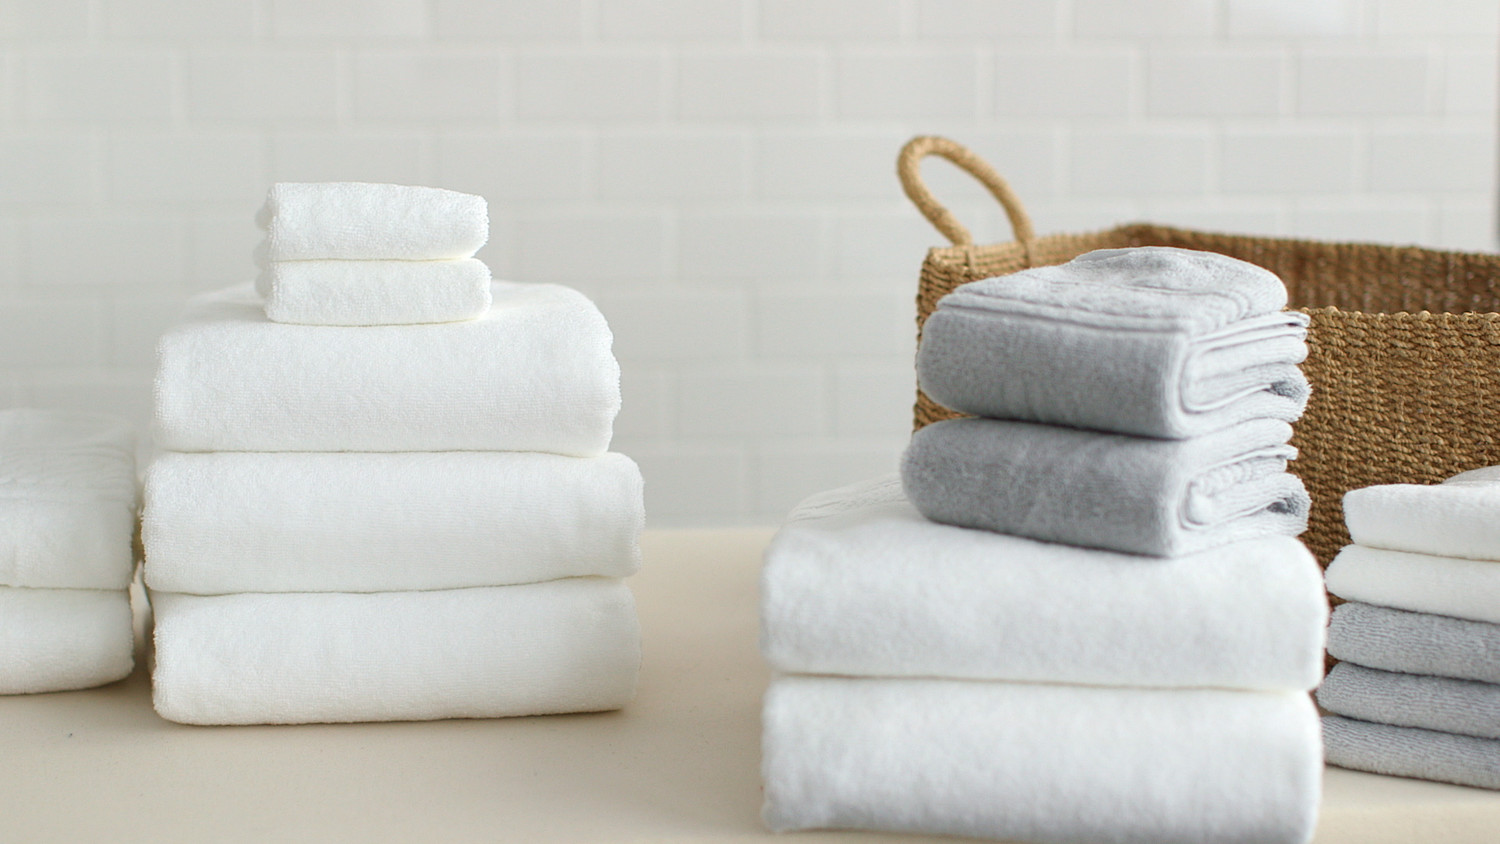 How to Care for Your Towels | Martha Stewart